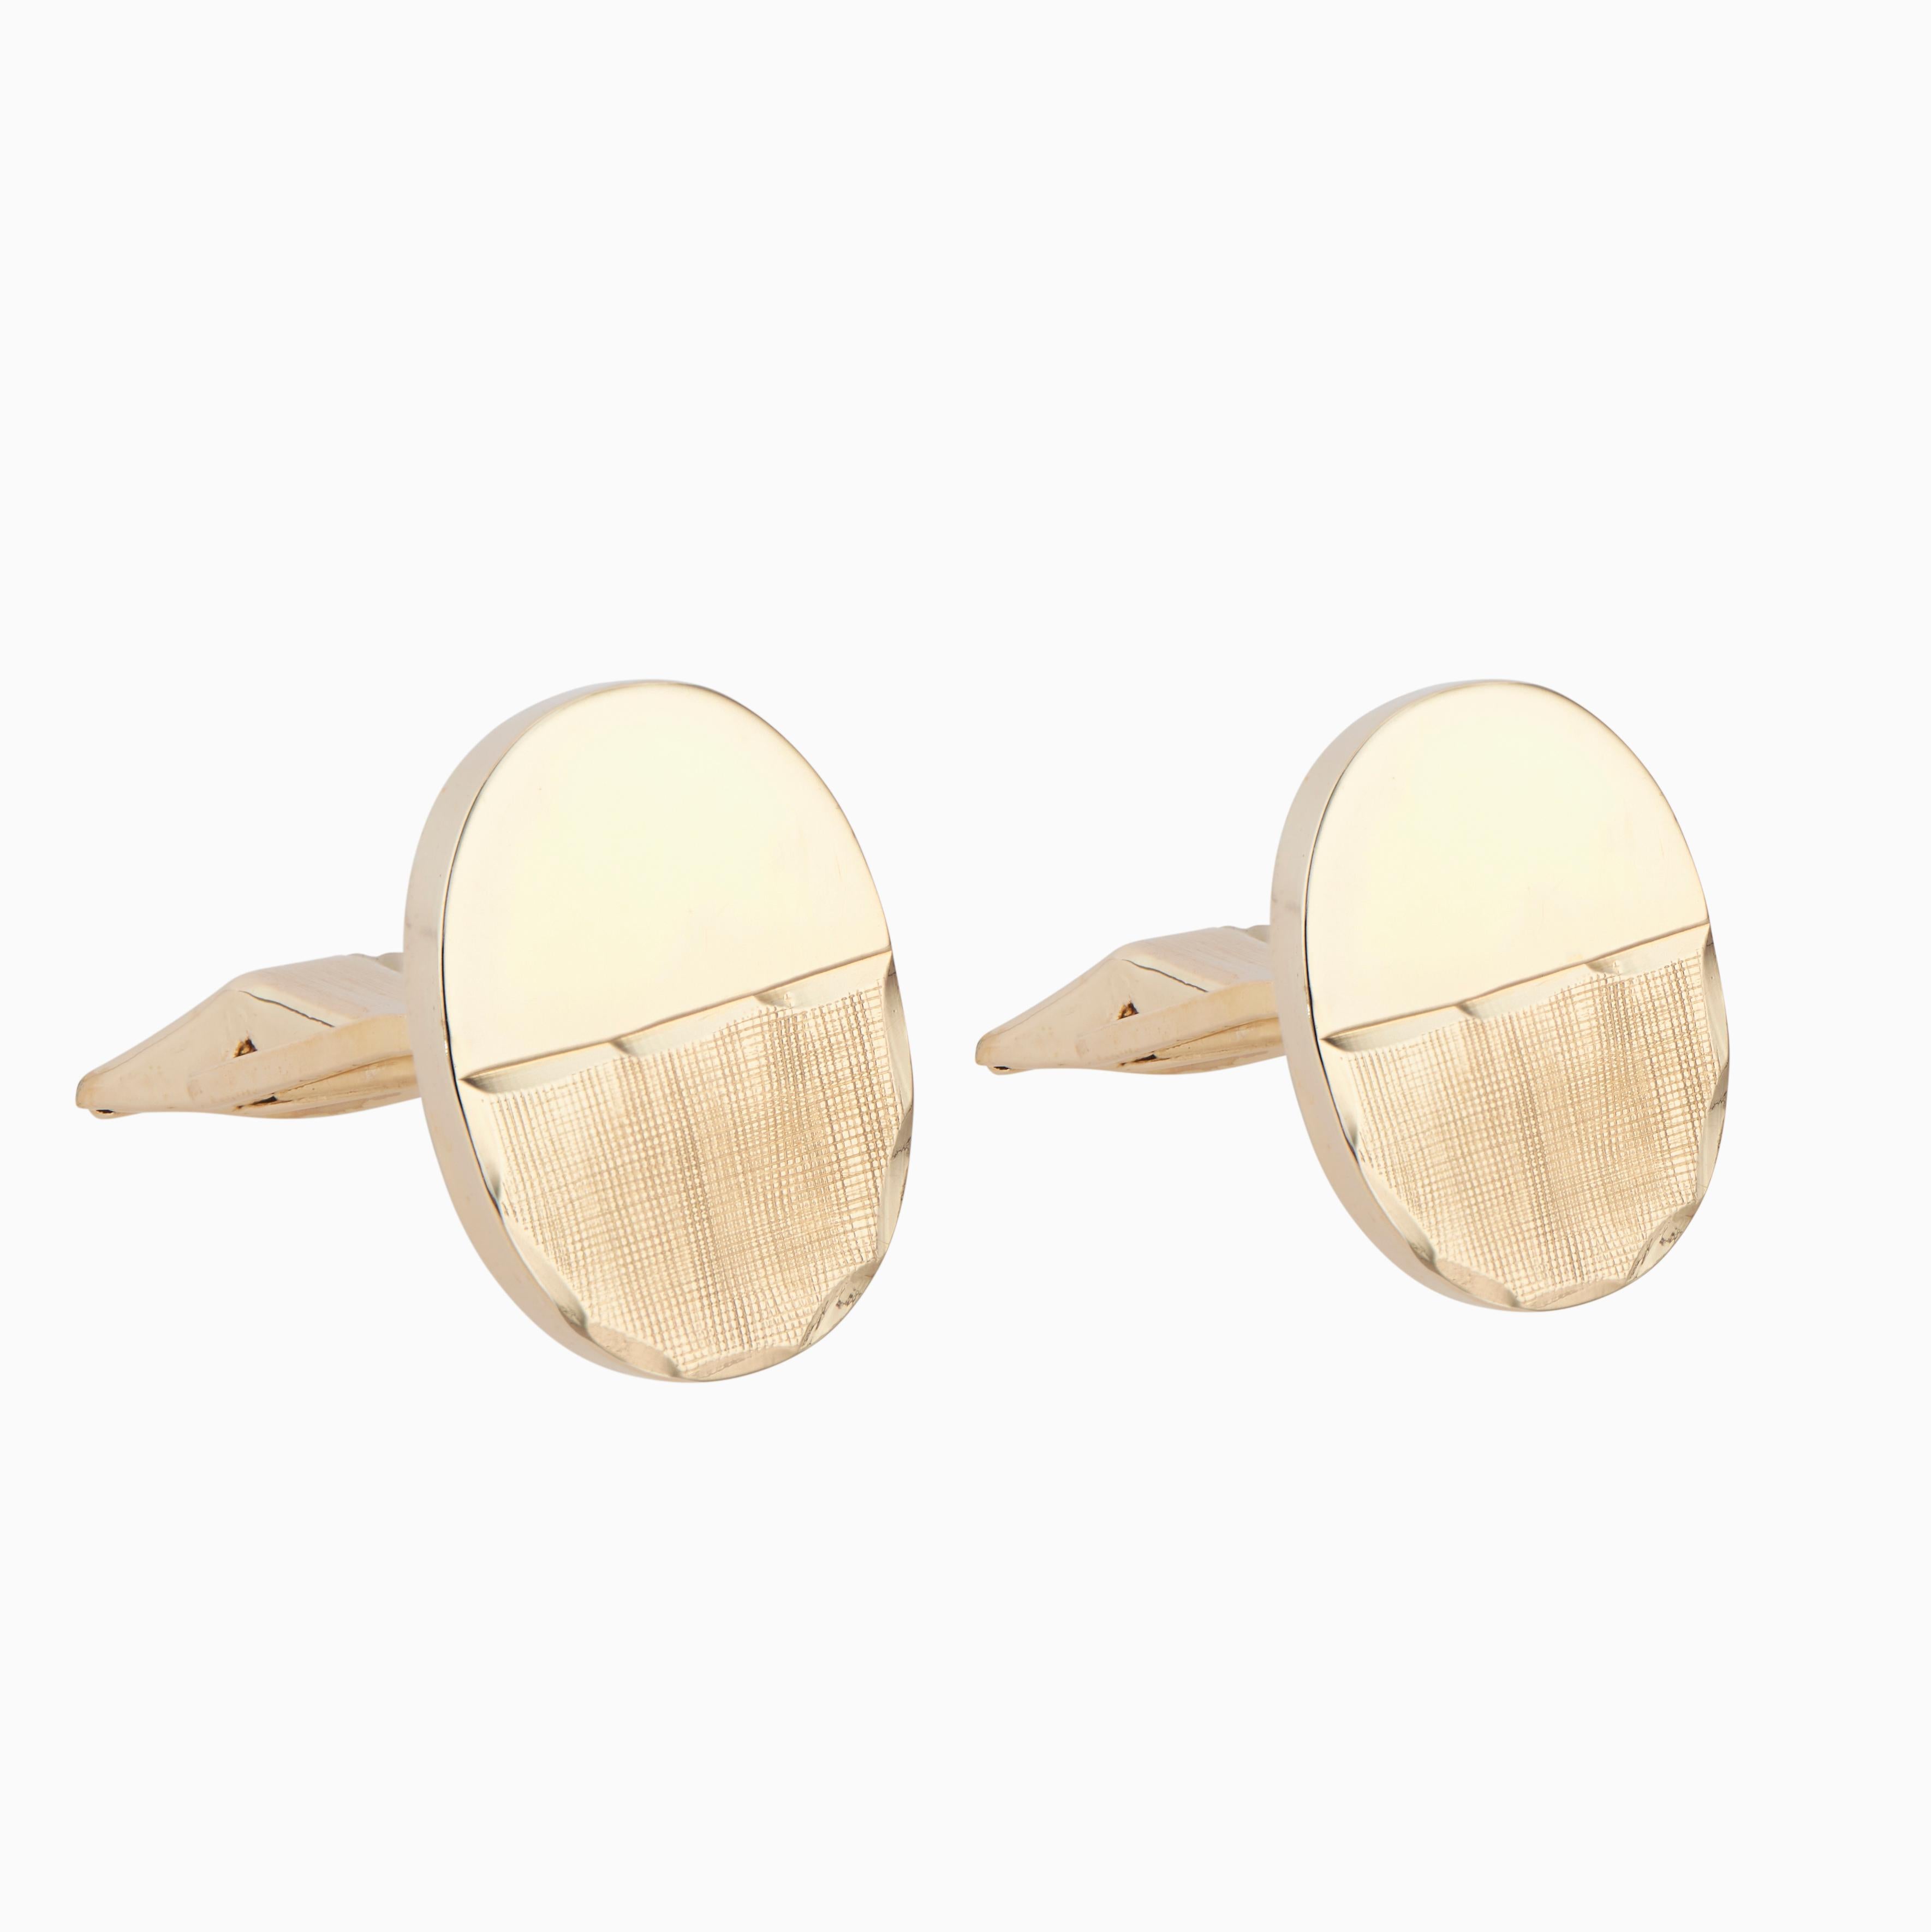 Oval polished and textured 14k yellow gold cufflinks 

14k yellow gold 
Stamped: 14k
6.9 grams
Top to bottom: 13.6mm or .5 Inch
Width: 18.2mm or .75 Inch
Depth or thickness: 2.2mm
